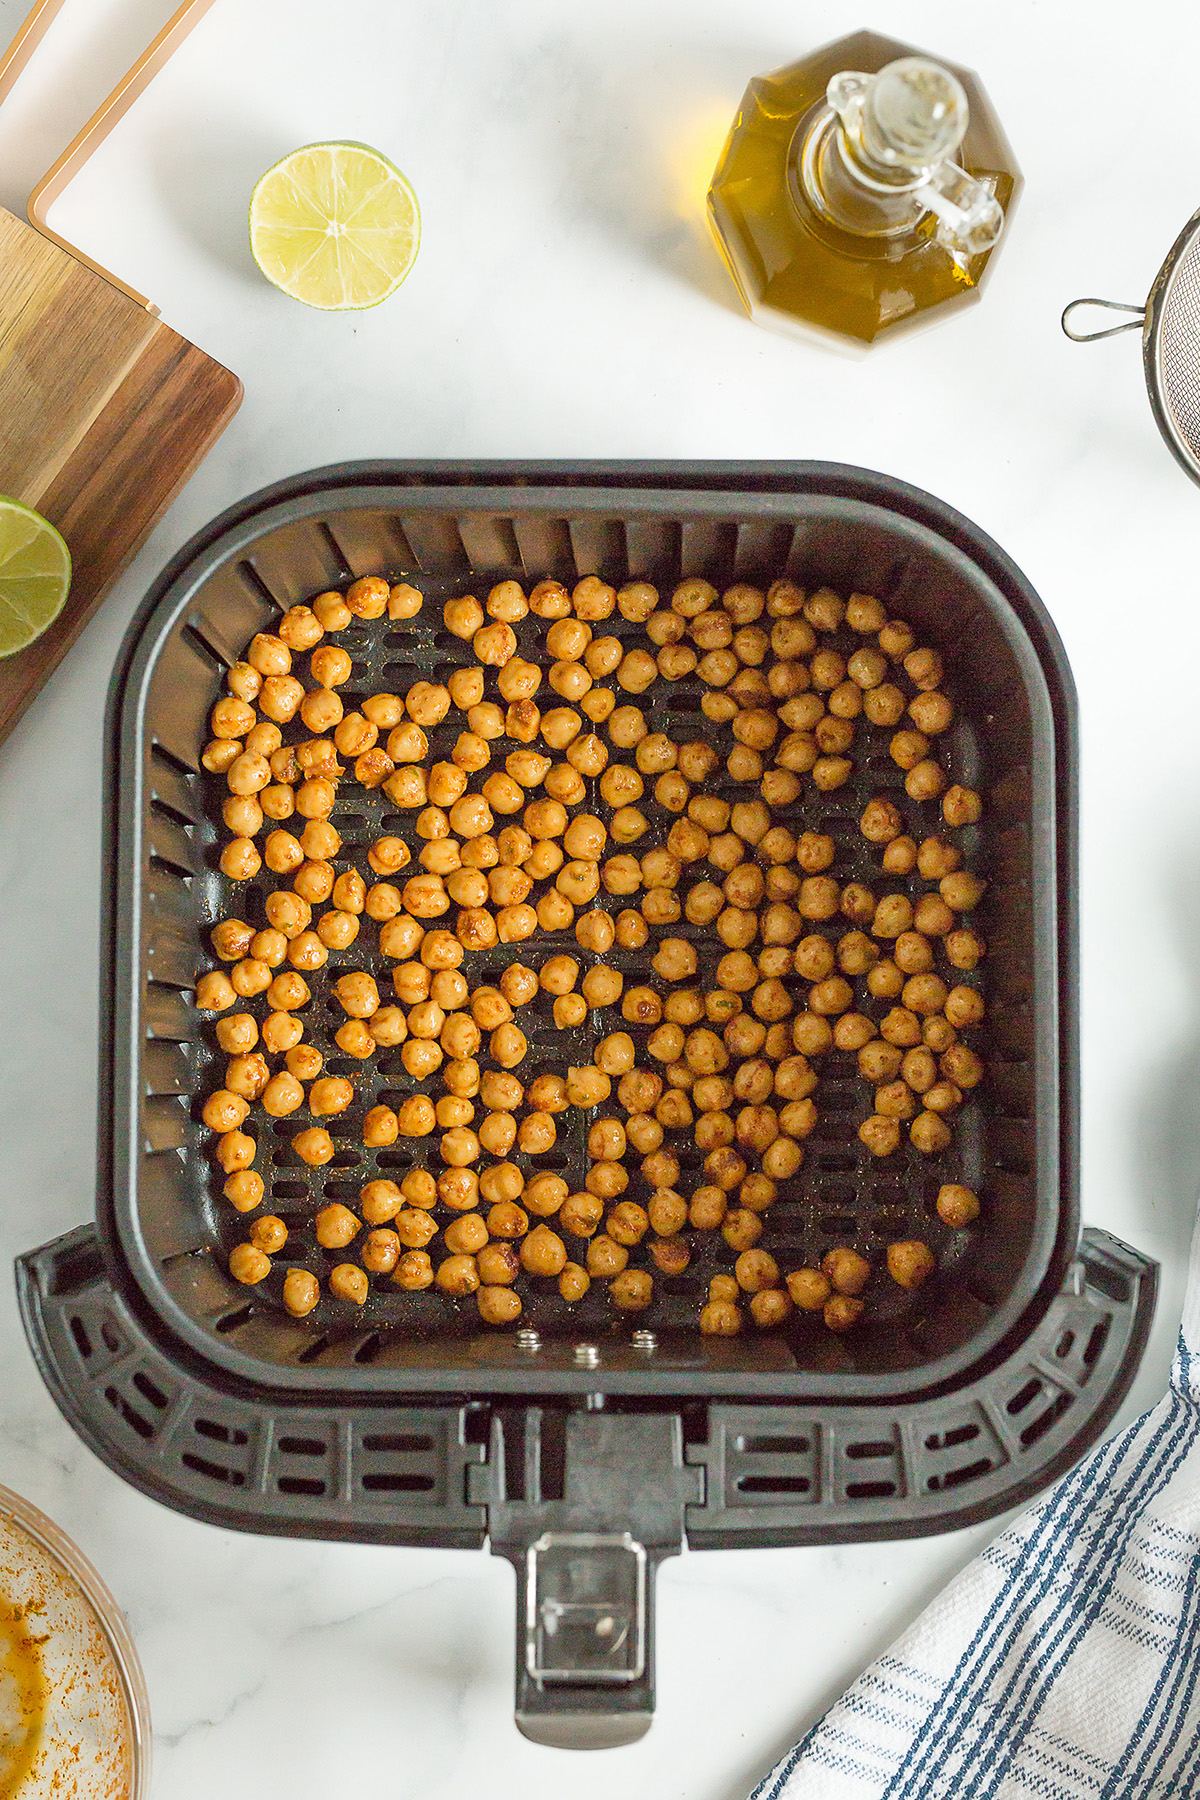 Overhead view of chickpeas spread out in an air fryer basket